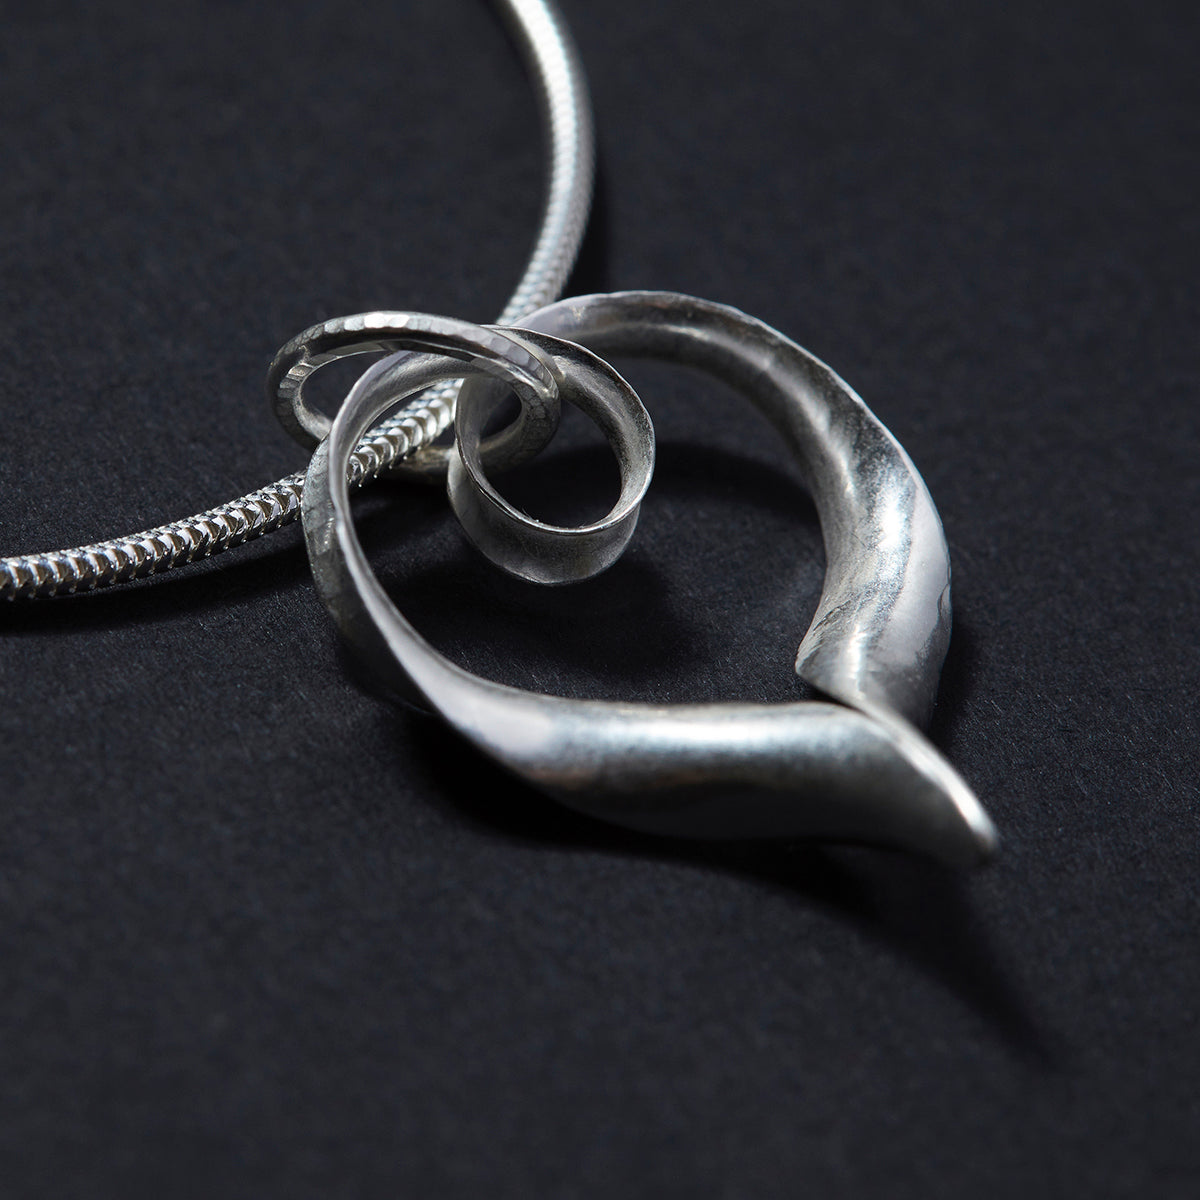 Ripple silver heart pendant on silver snake chain, seen from the back.